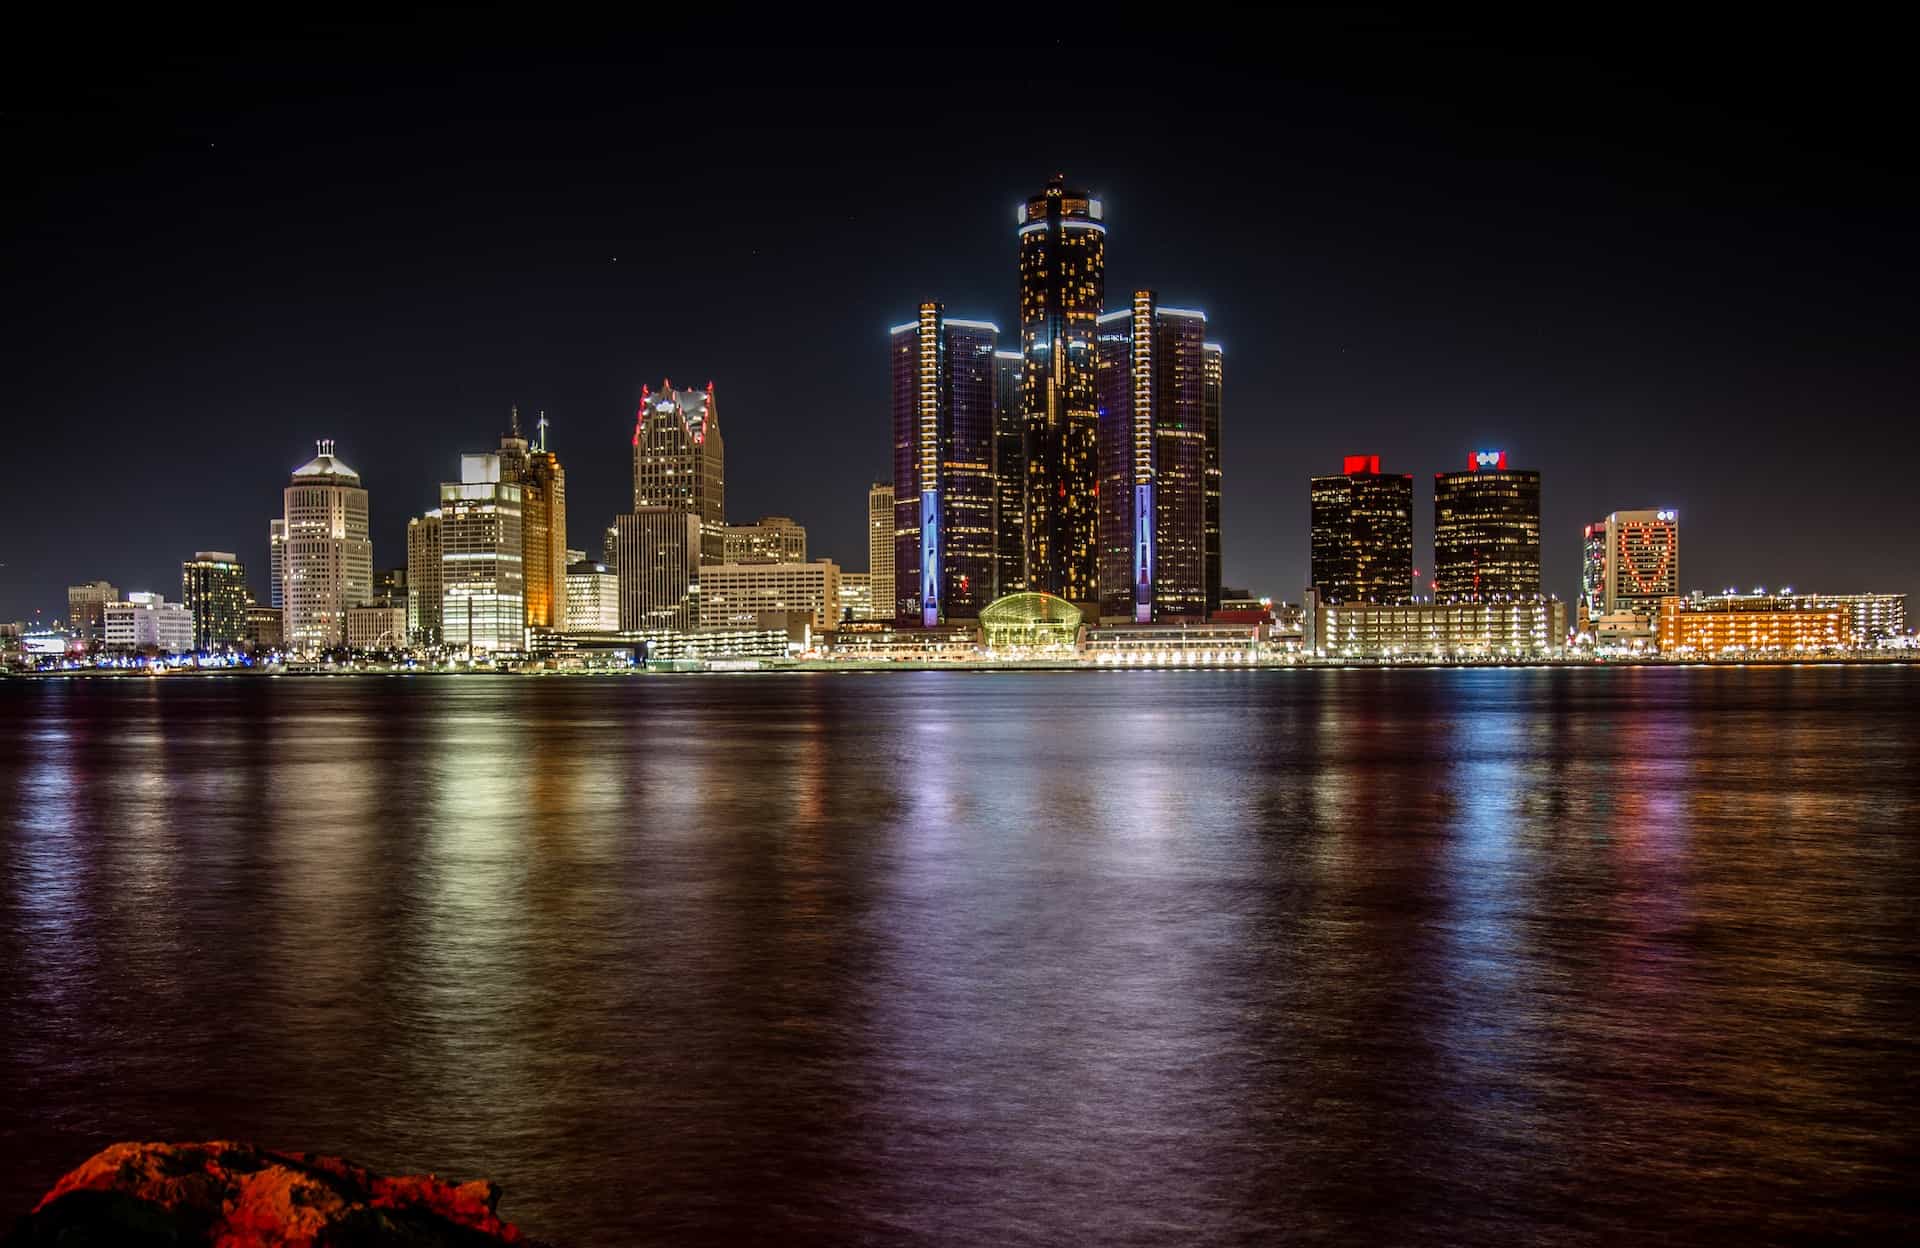 A view of downtown Detroit, Michigan from Lake Michigan, featuring several tall buildings and skyscrapers lighting up the night sky.